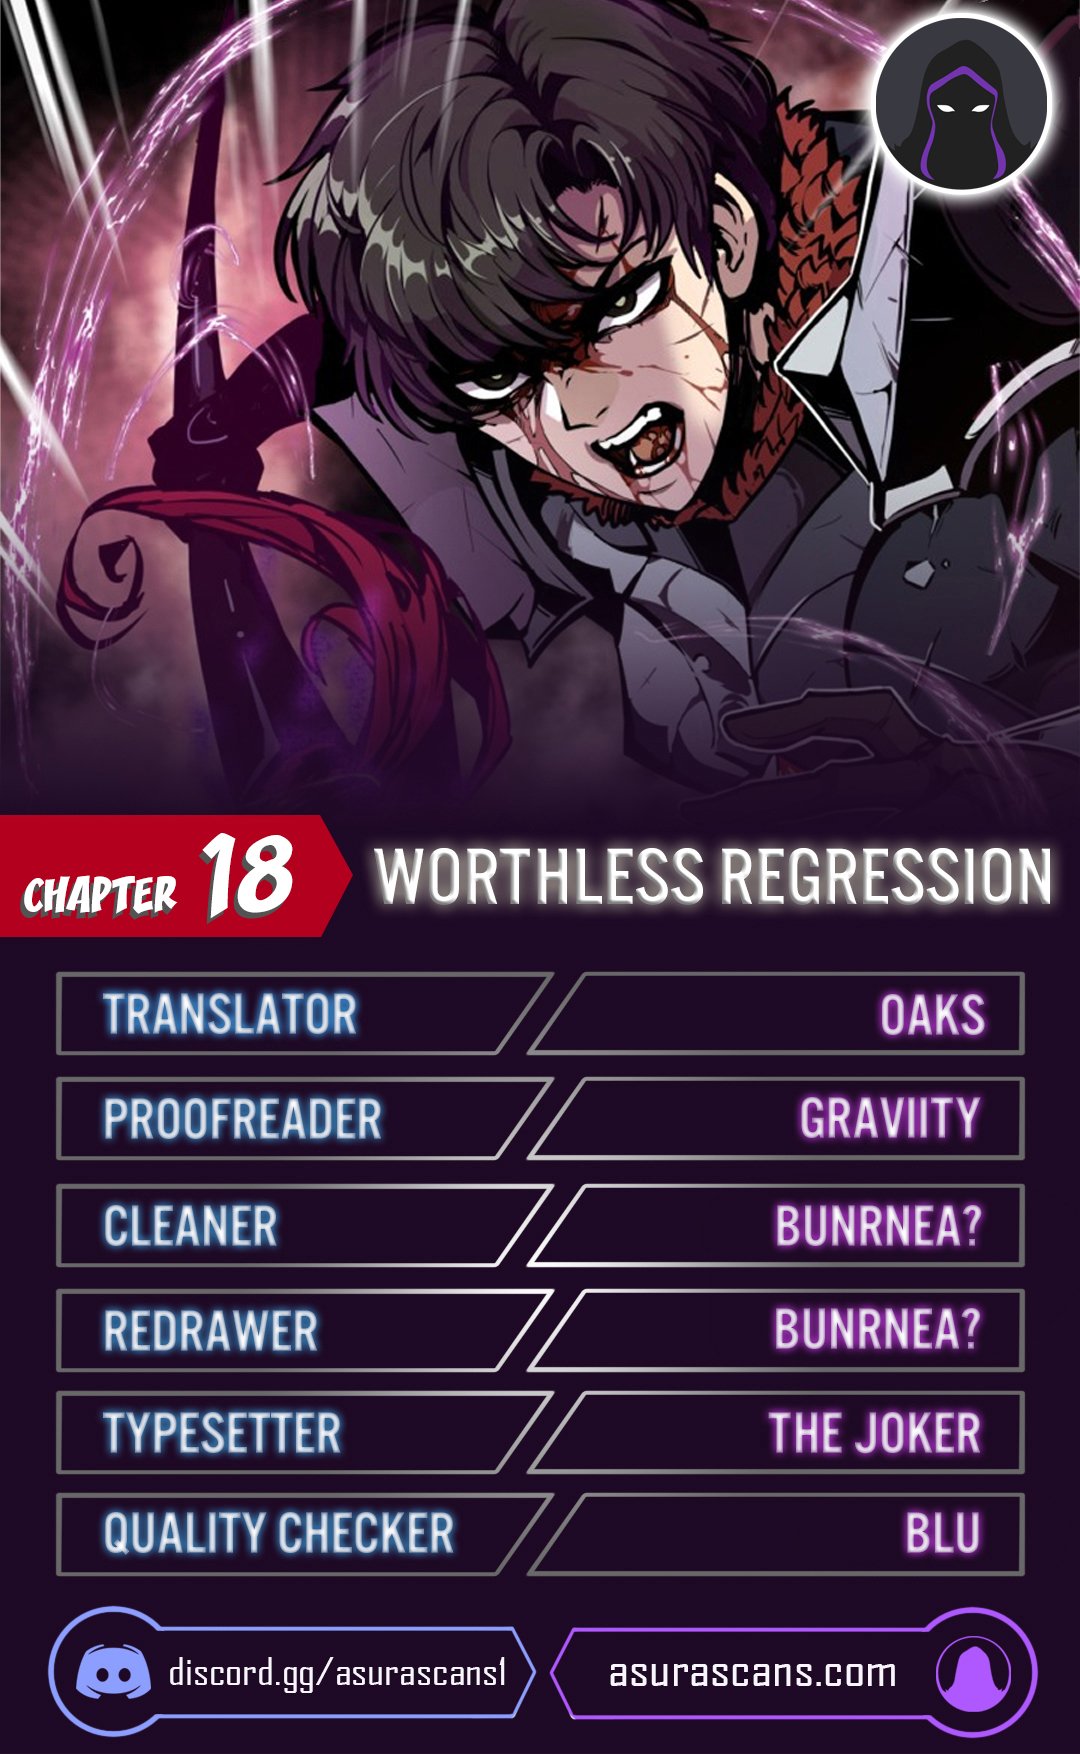 Worthless Regression - Chapter 20456 - Image 1